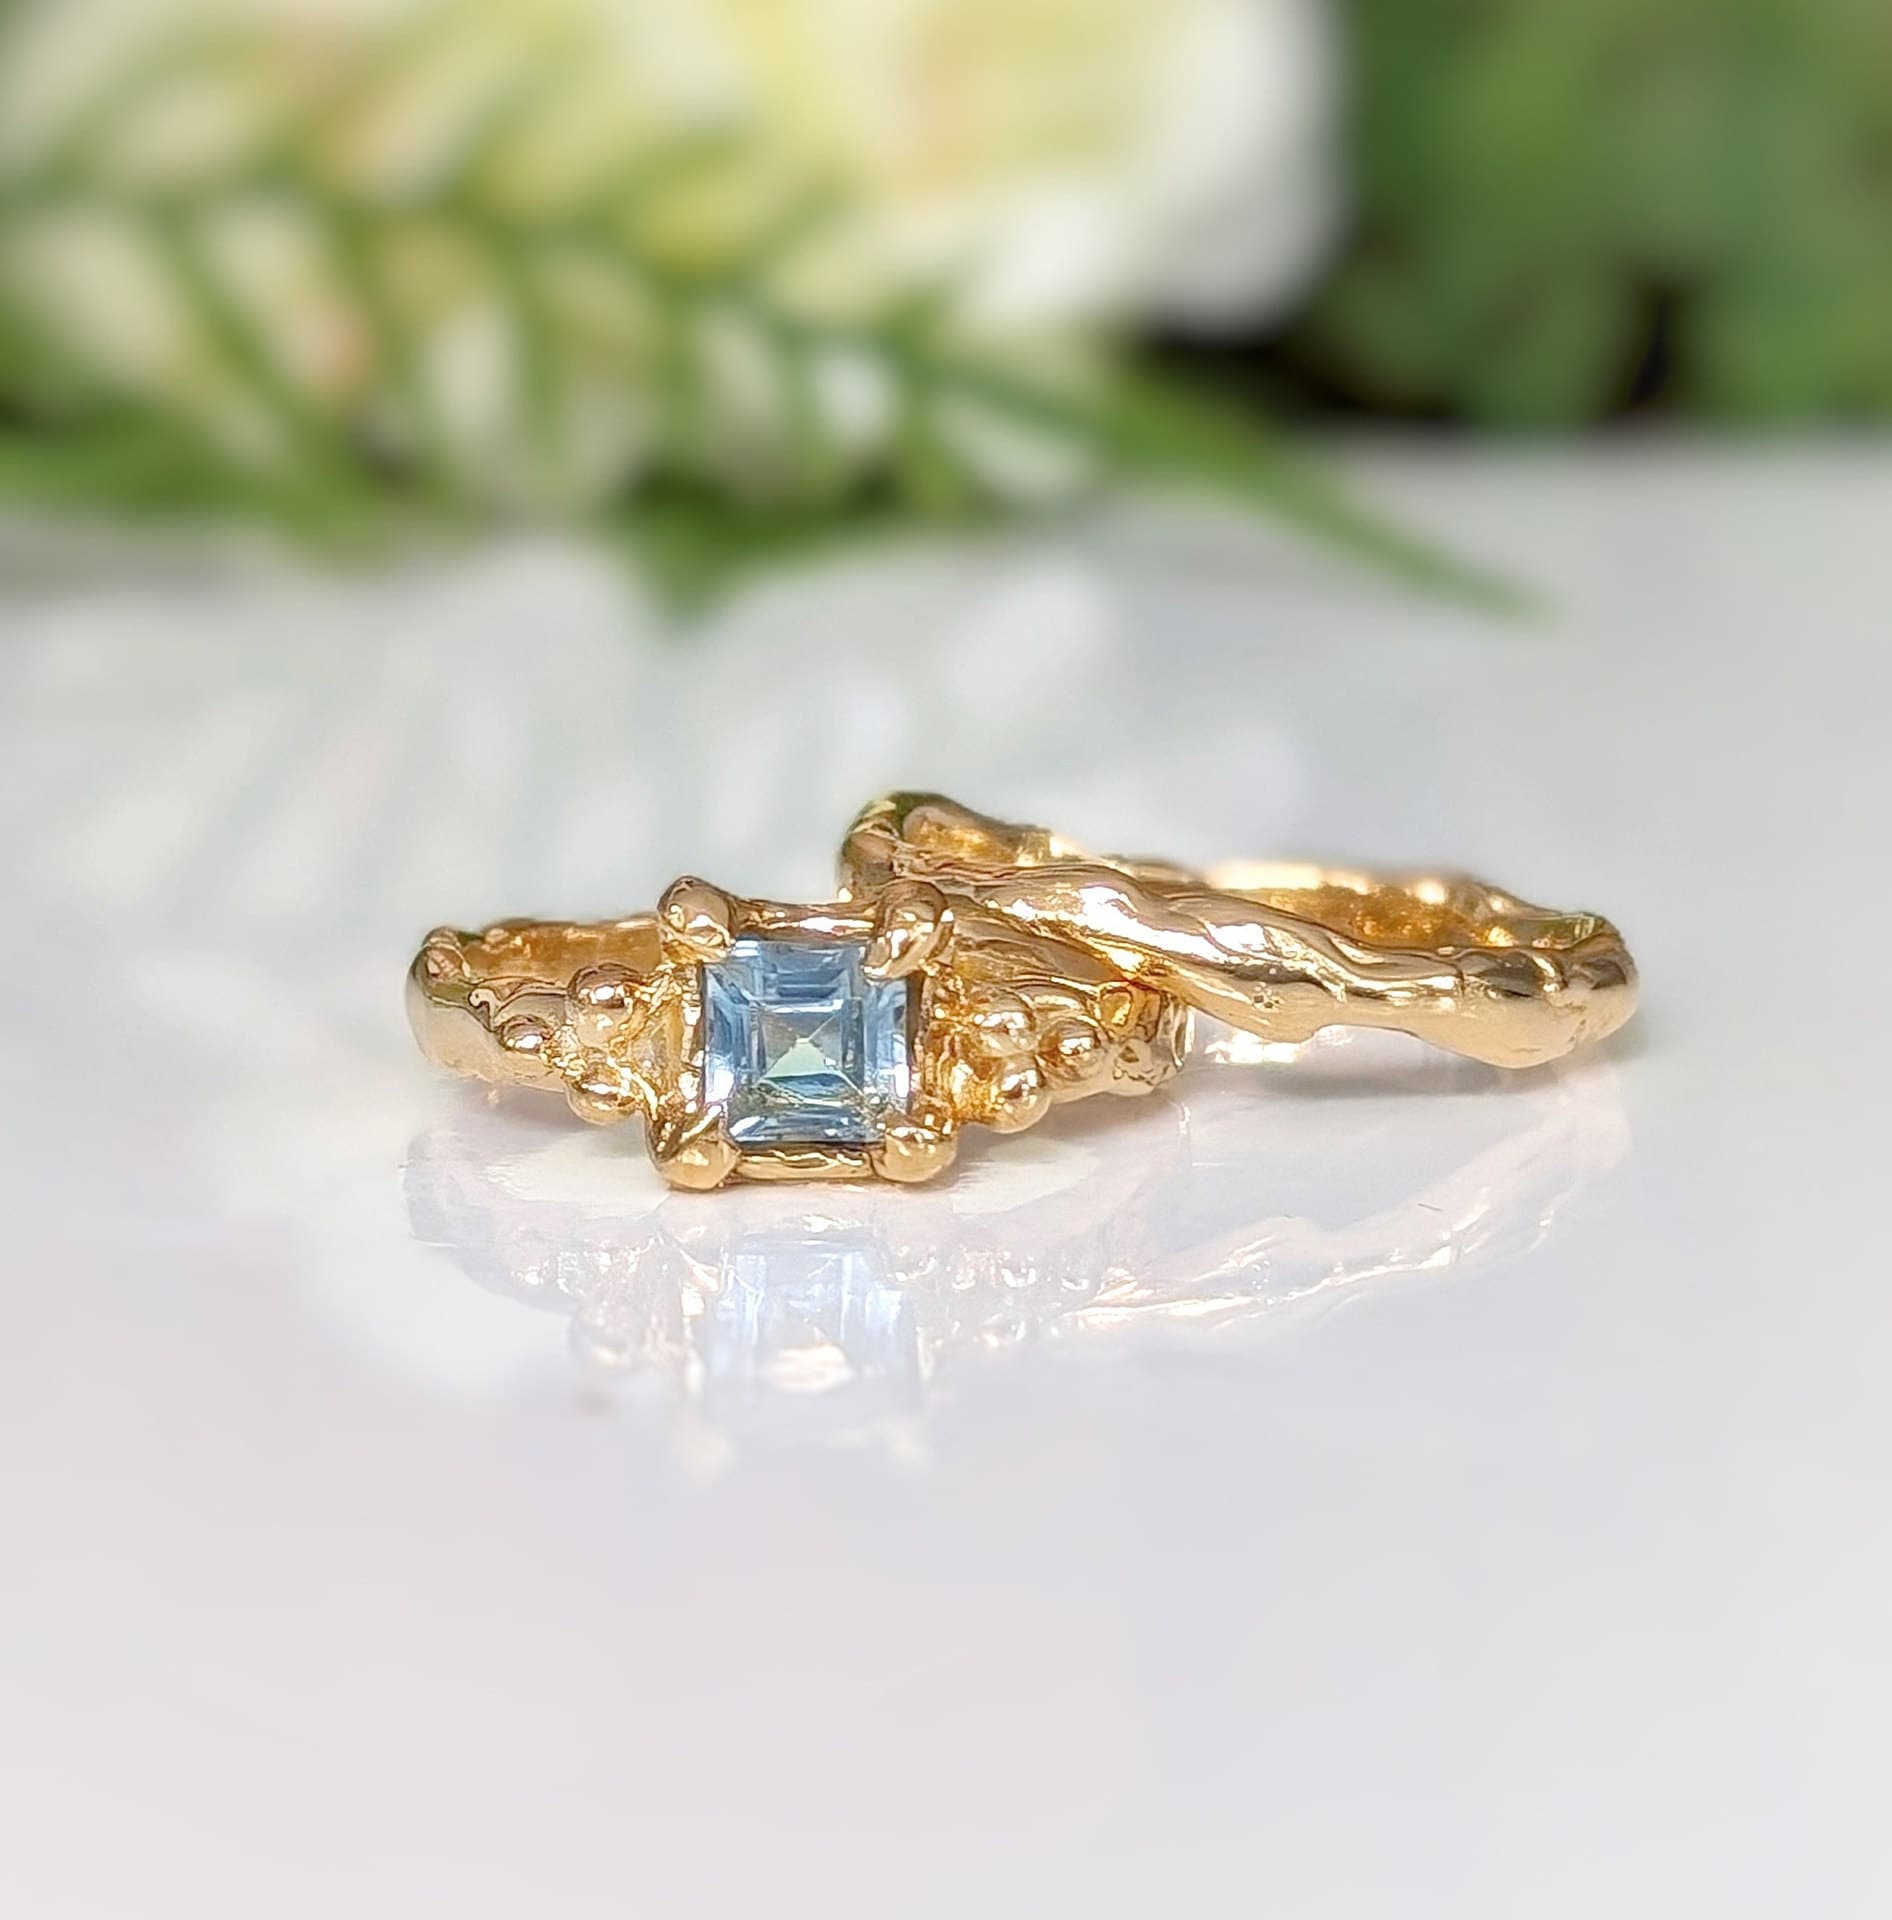 Set of  wedding rings - Blue Topaz engagement ring and textured wedding band - both in Molten 14k Gold 